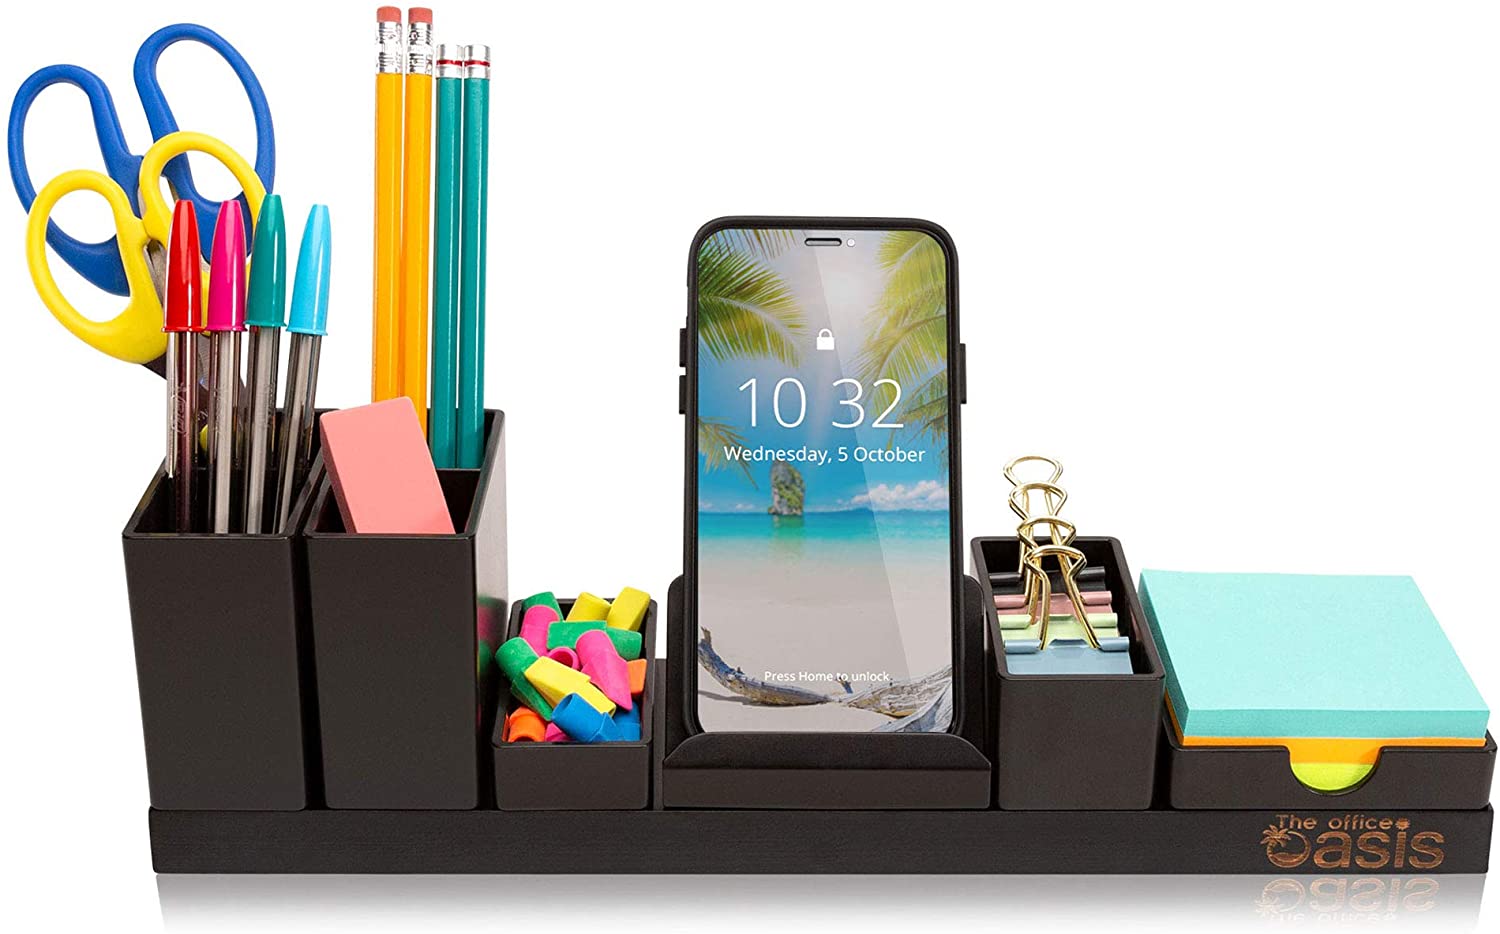 Do you need a desk organizer to set up a productive workspace at home